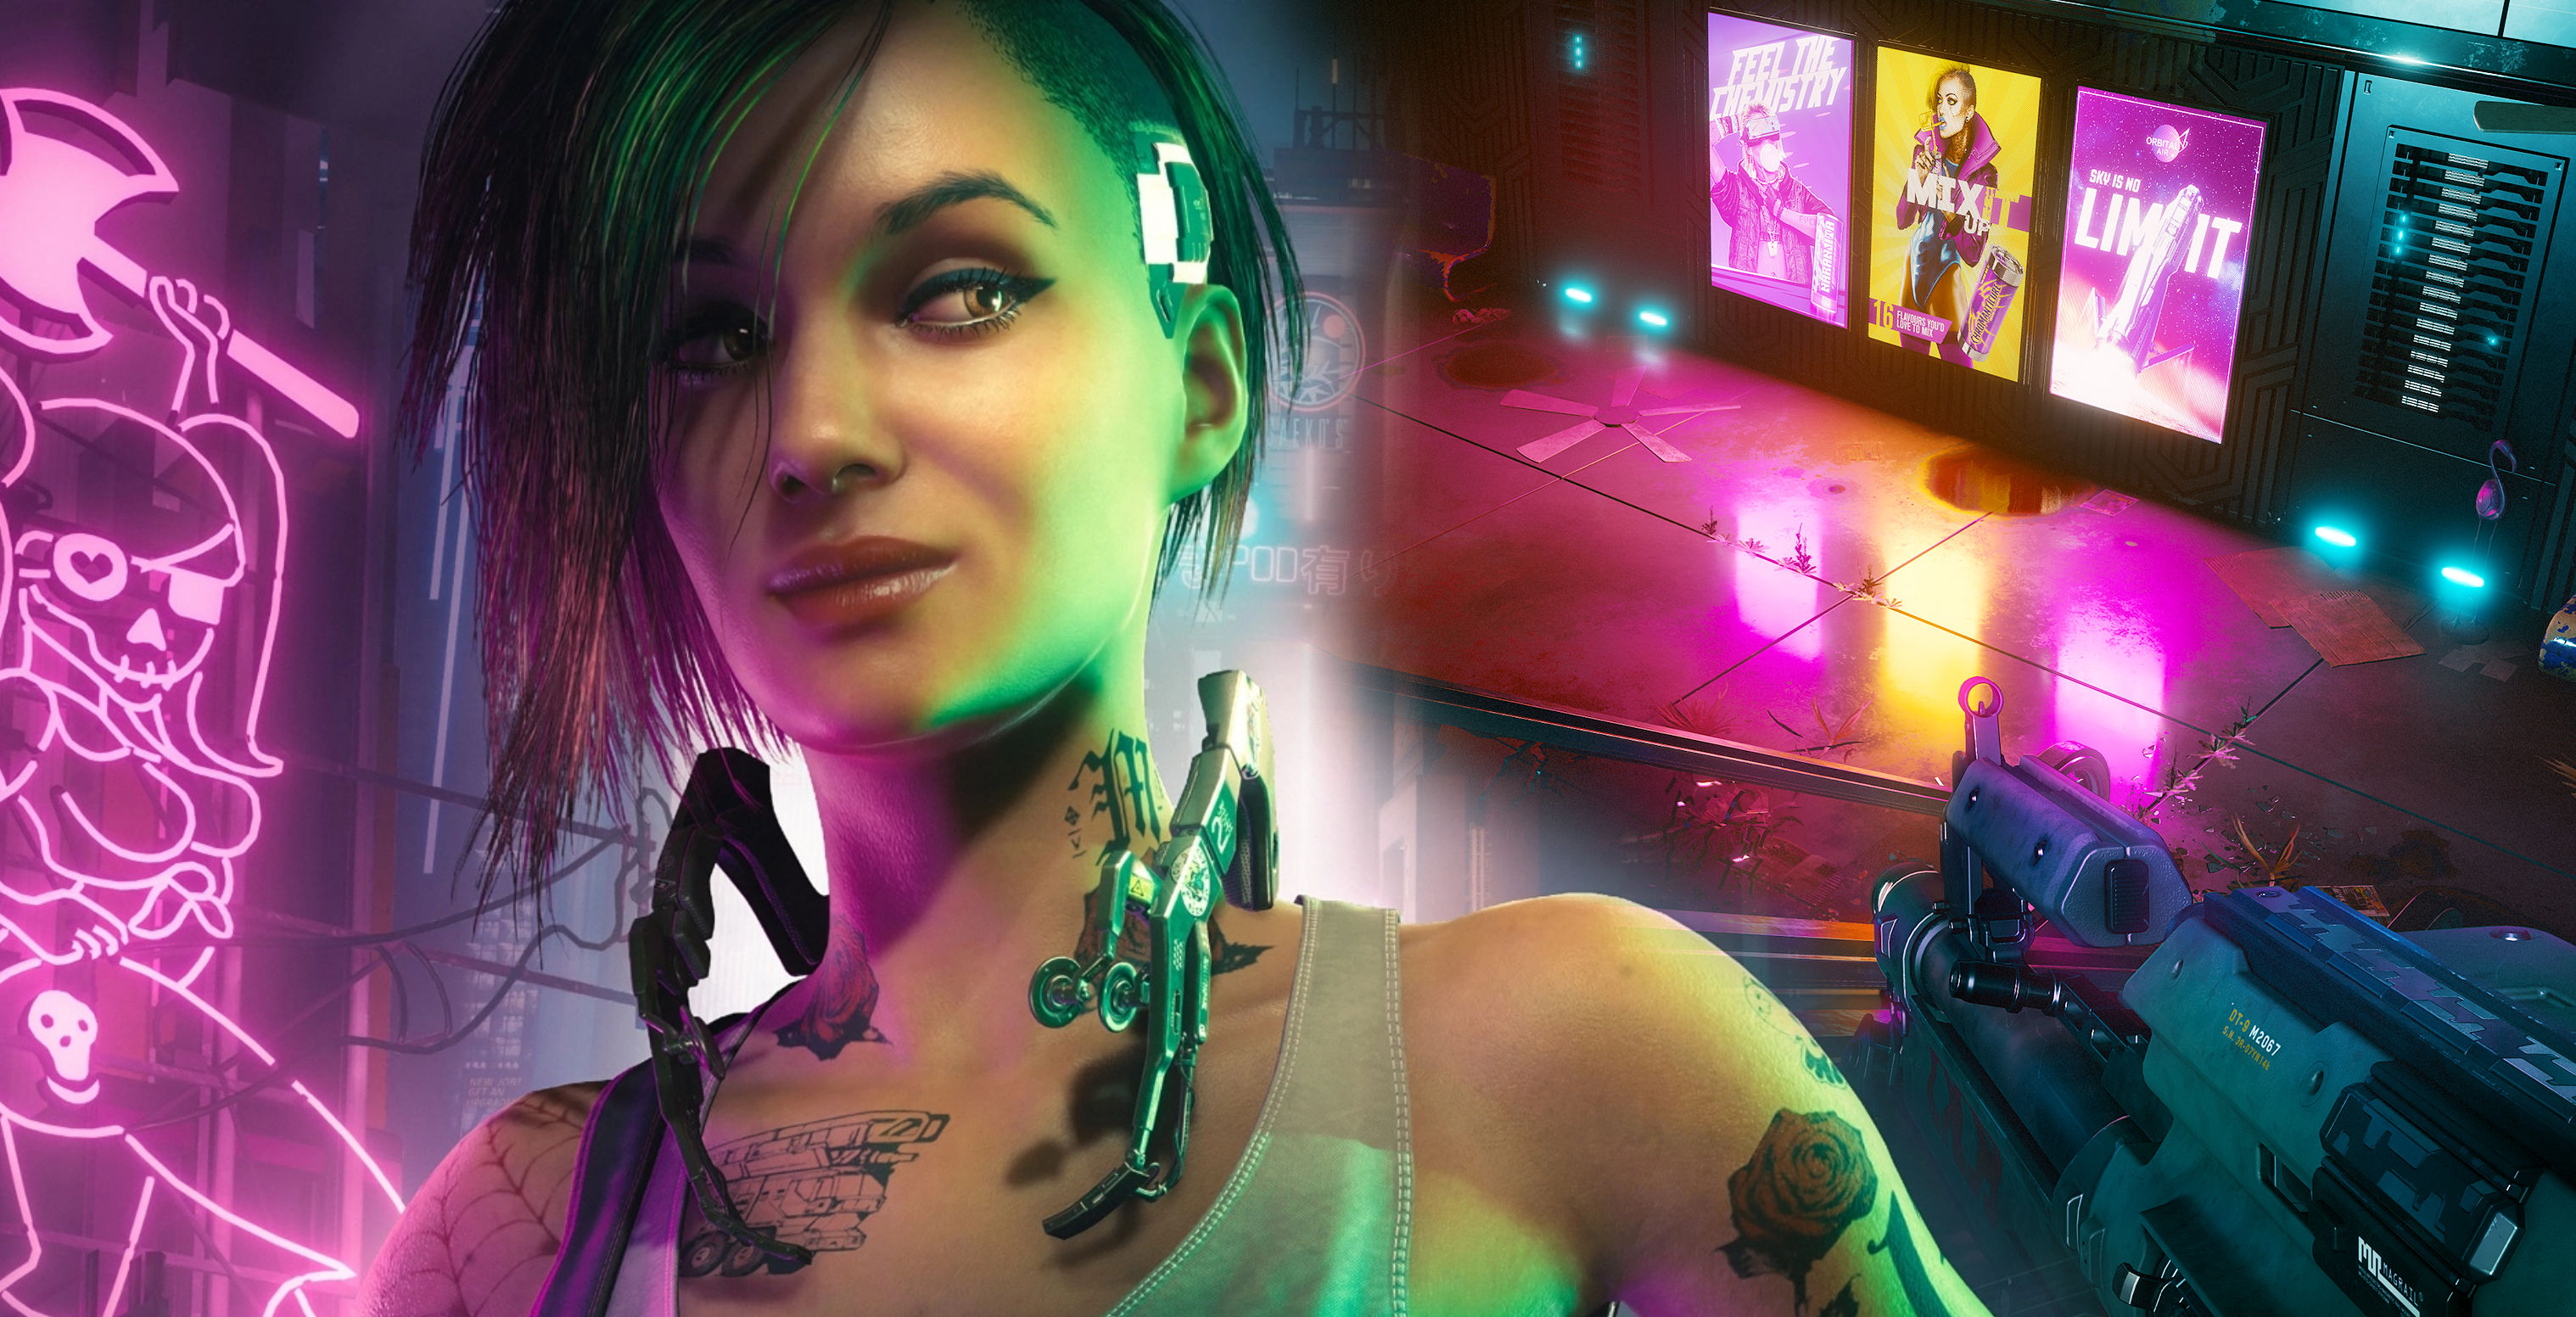 Made Faith in Cyberpunk 2077 (with mods). Mostly based on her